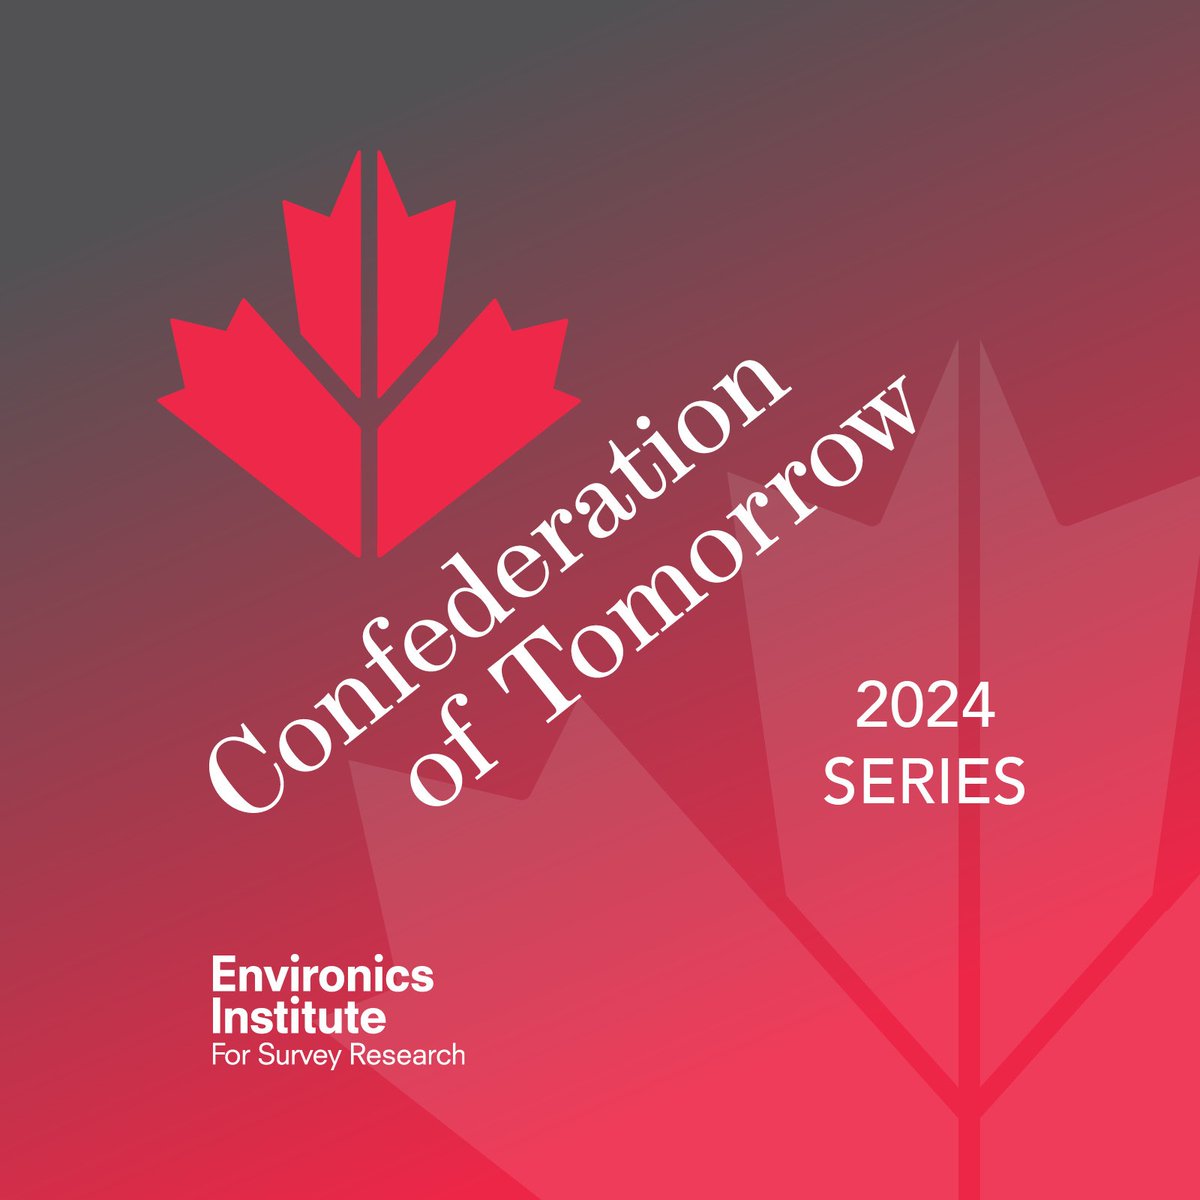 The first report from the 2024 Confederation of Tomorrow survey is out, and it features a number of findings of interest to those who are focusing on the current dispute between the PM and the premiers on the carbon tax. #CoT2024 #cdnpoli #cdnpolitics